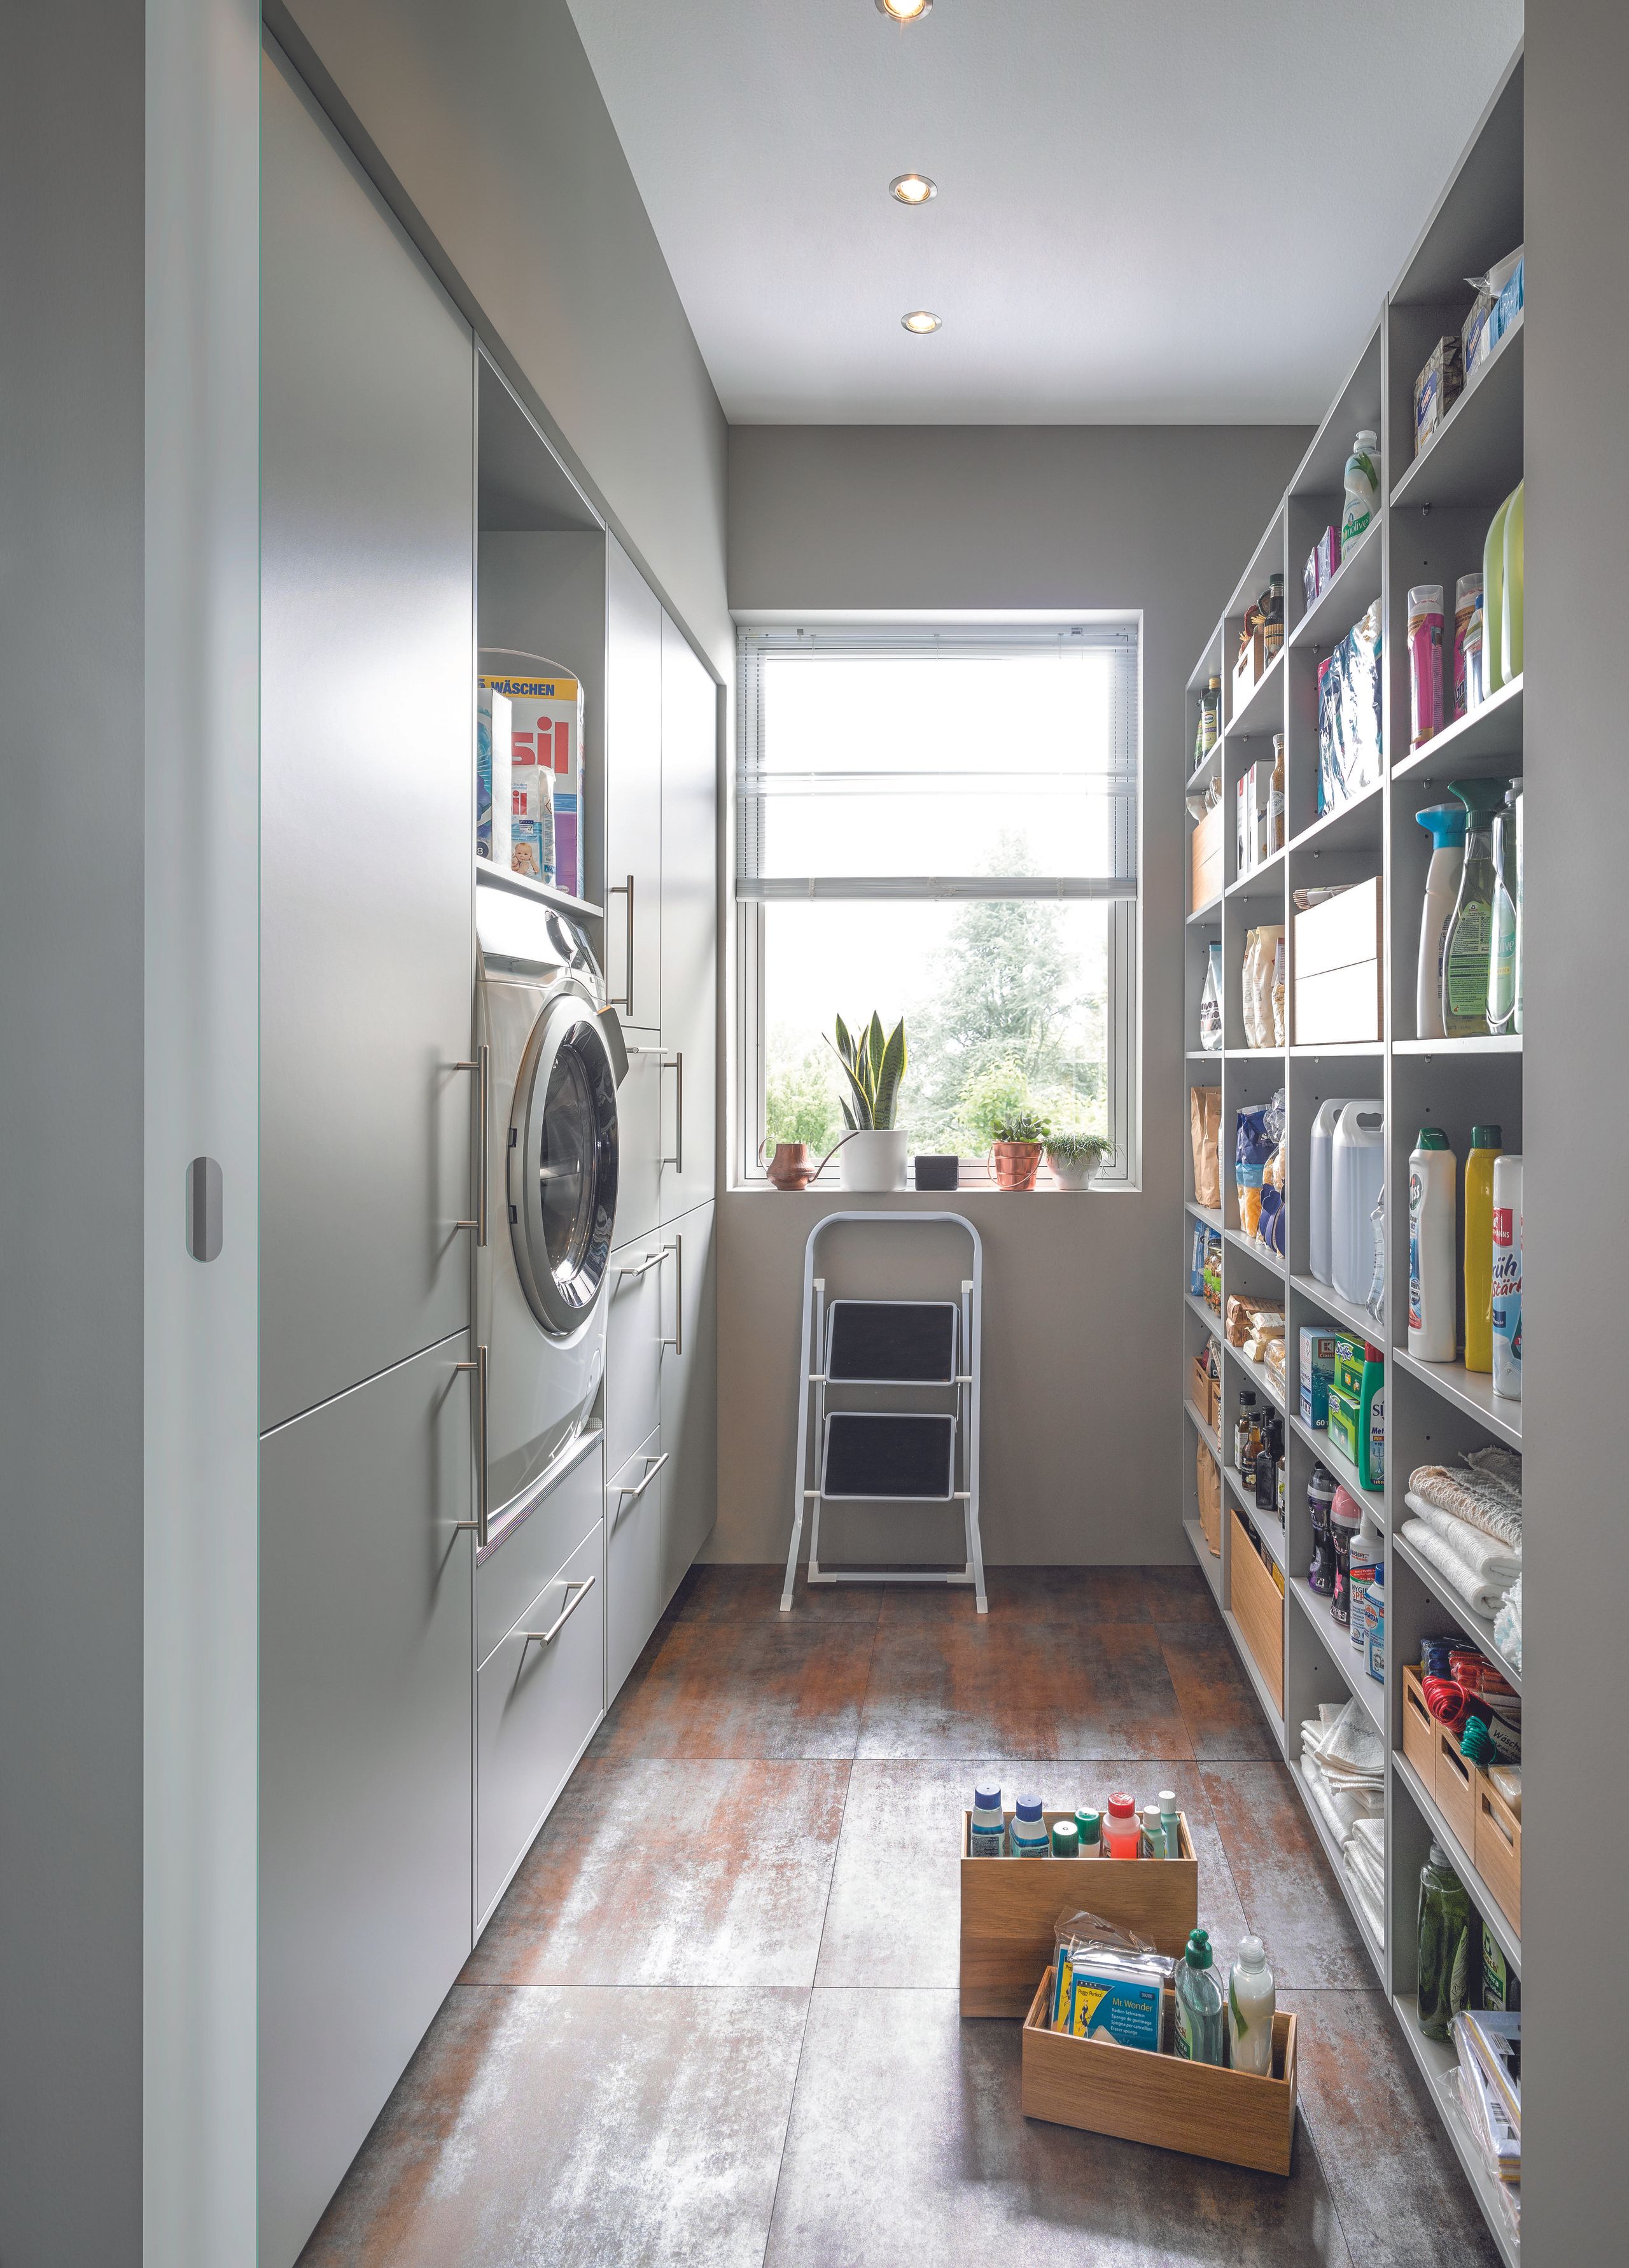 12 clever utility room design ideas | Real Homes